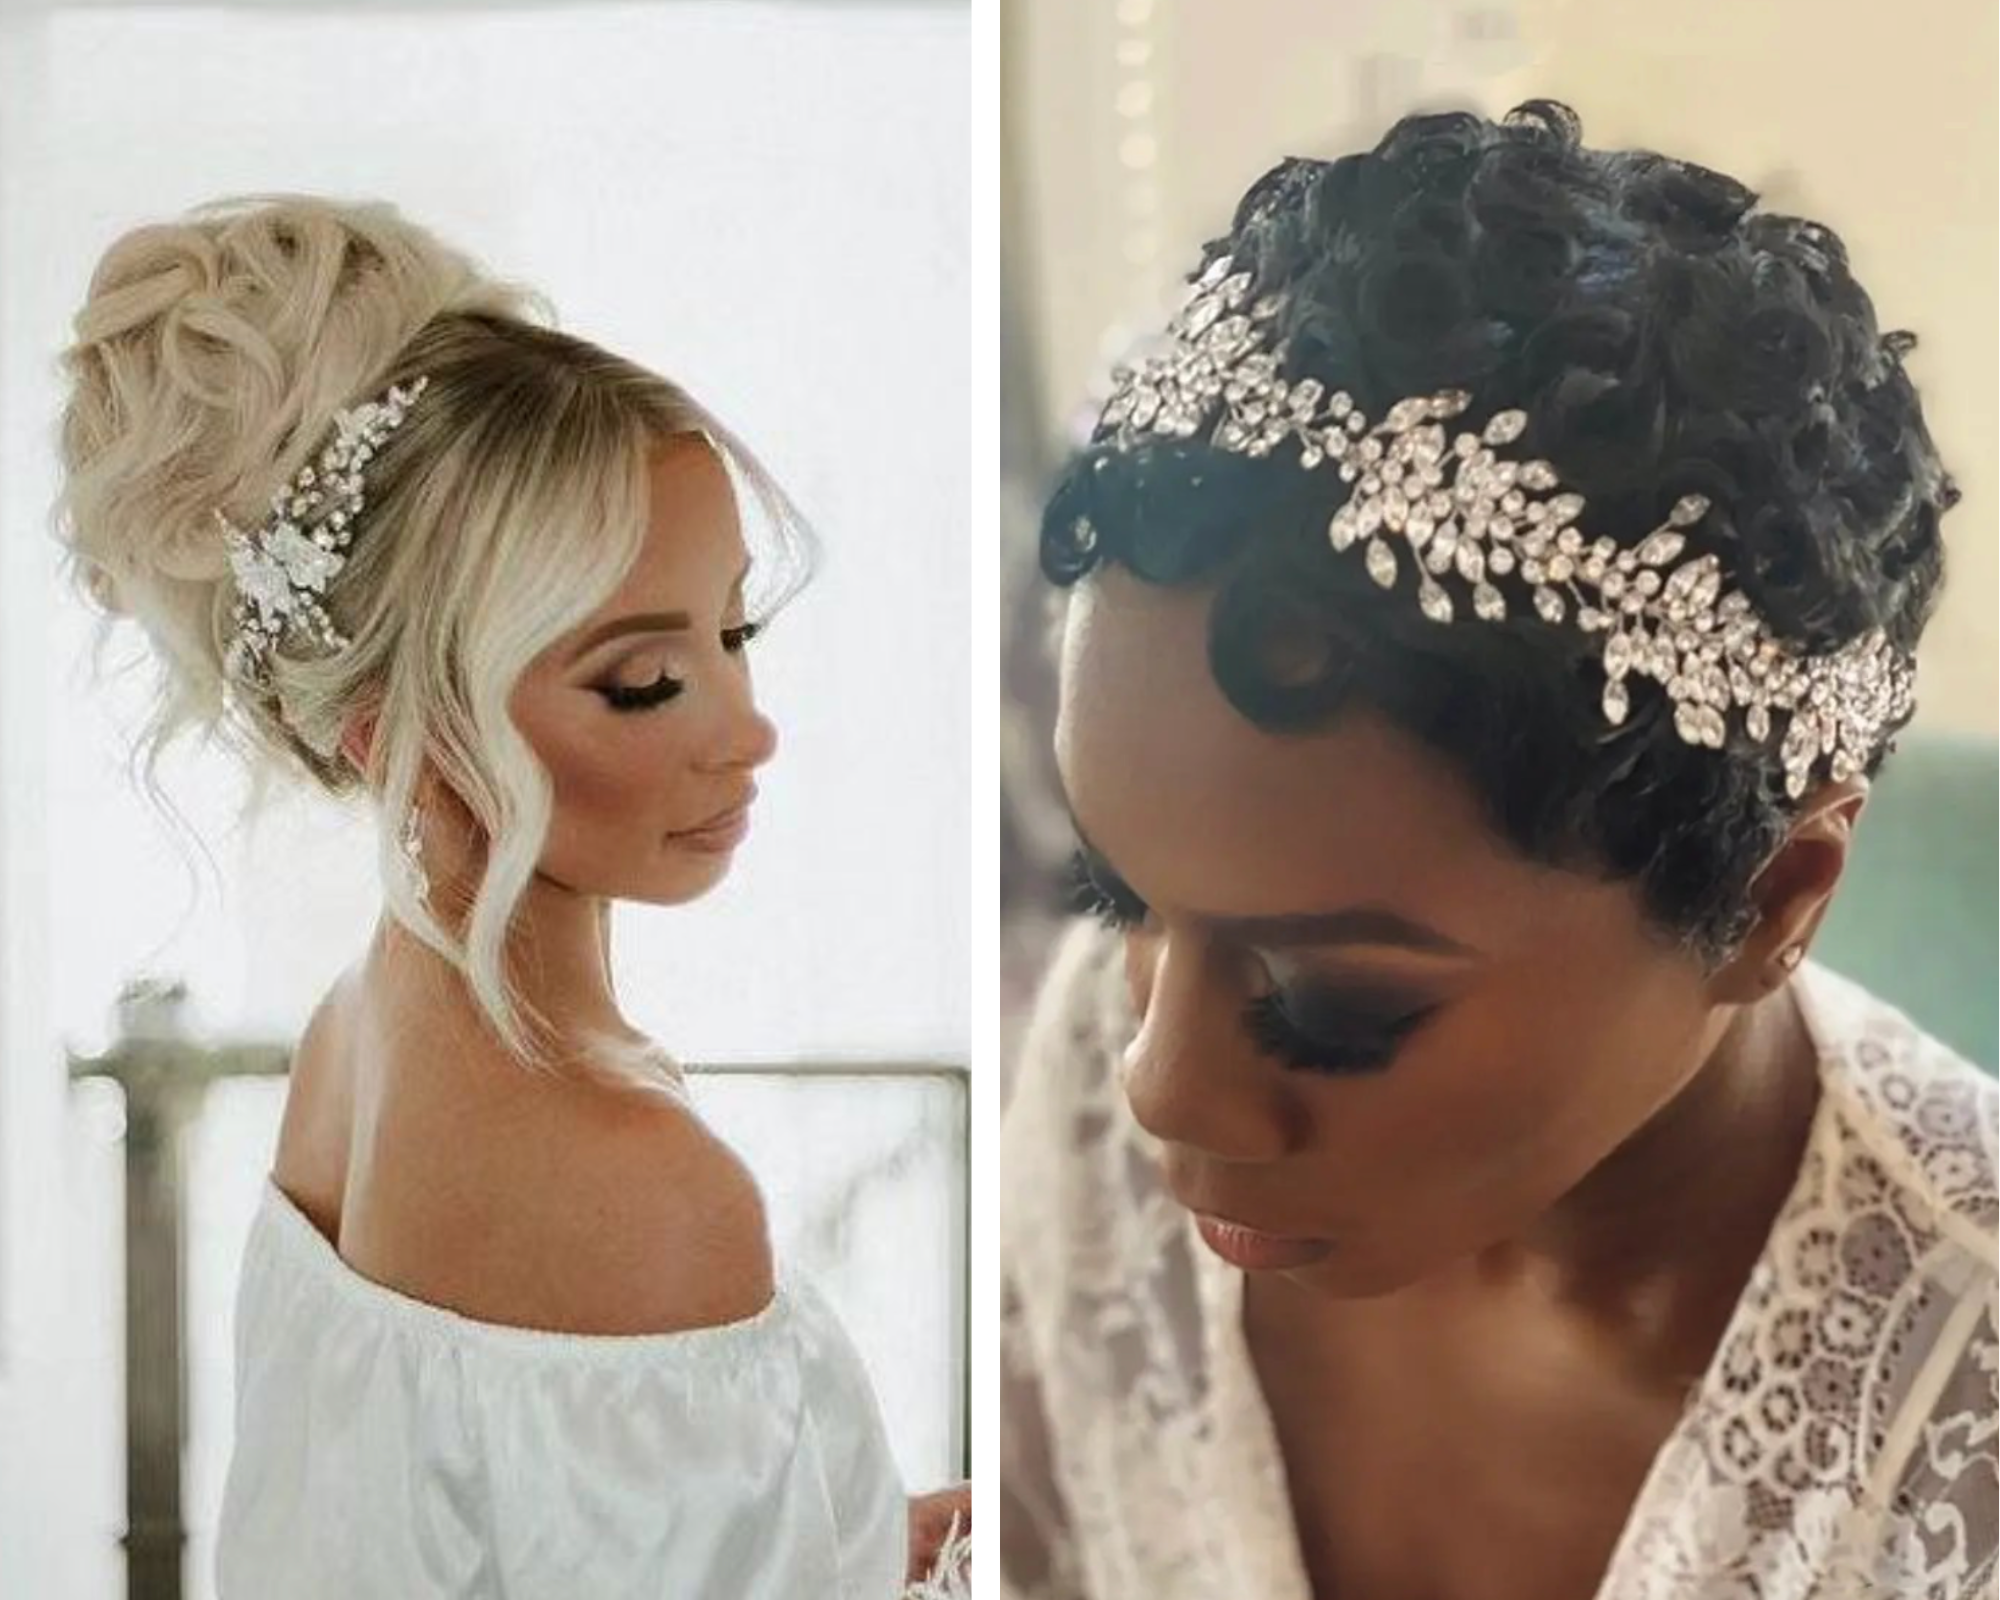 One bride wearing her curls in a timeless updo. The other is wearing her short ringlets with a crystal bridal headband.